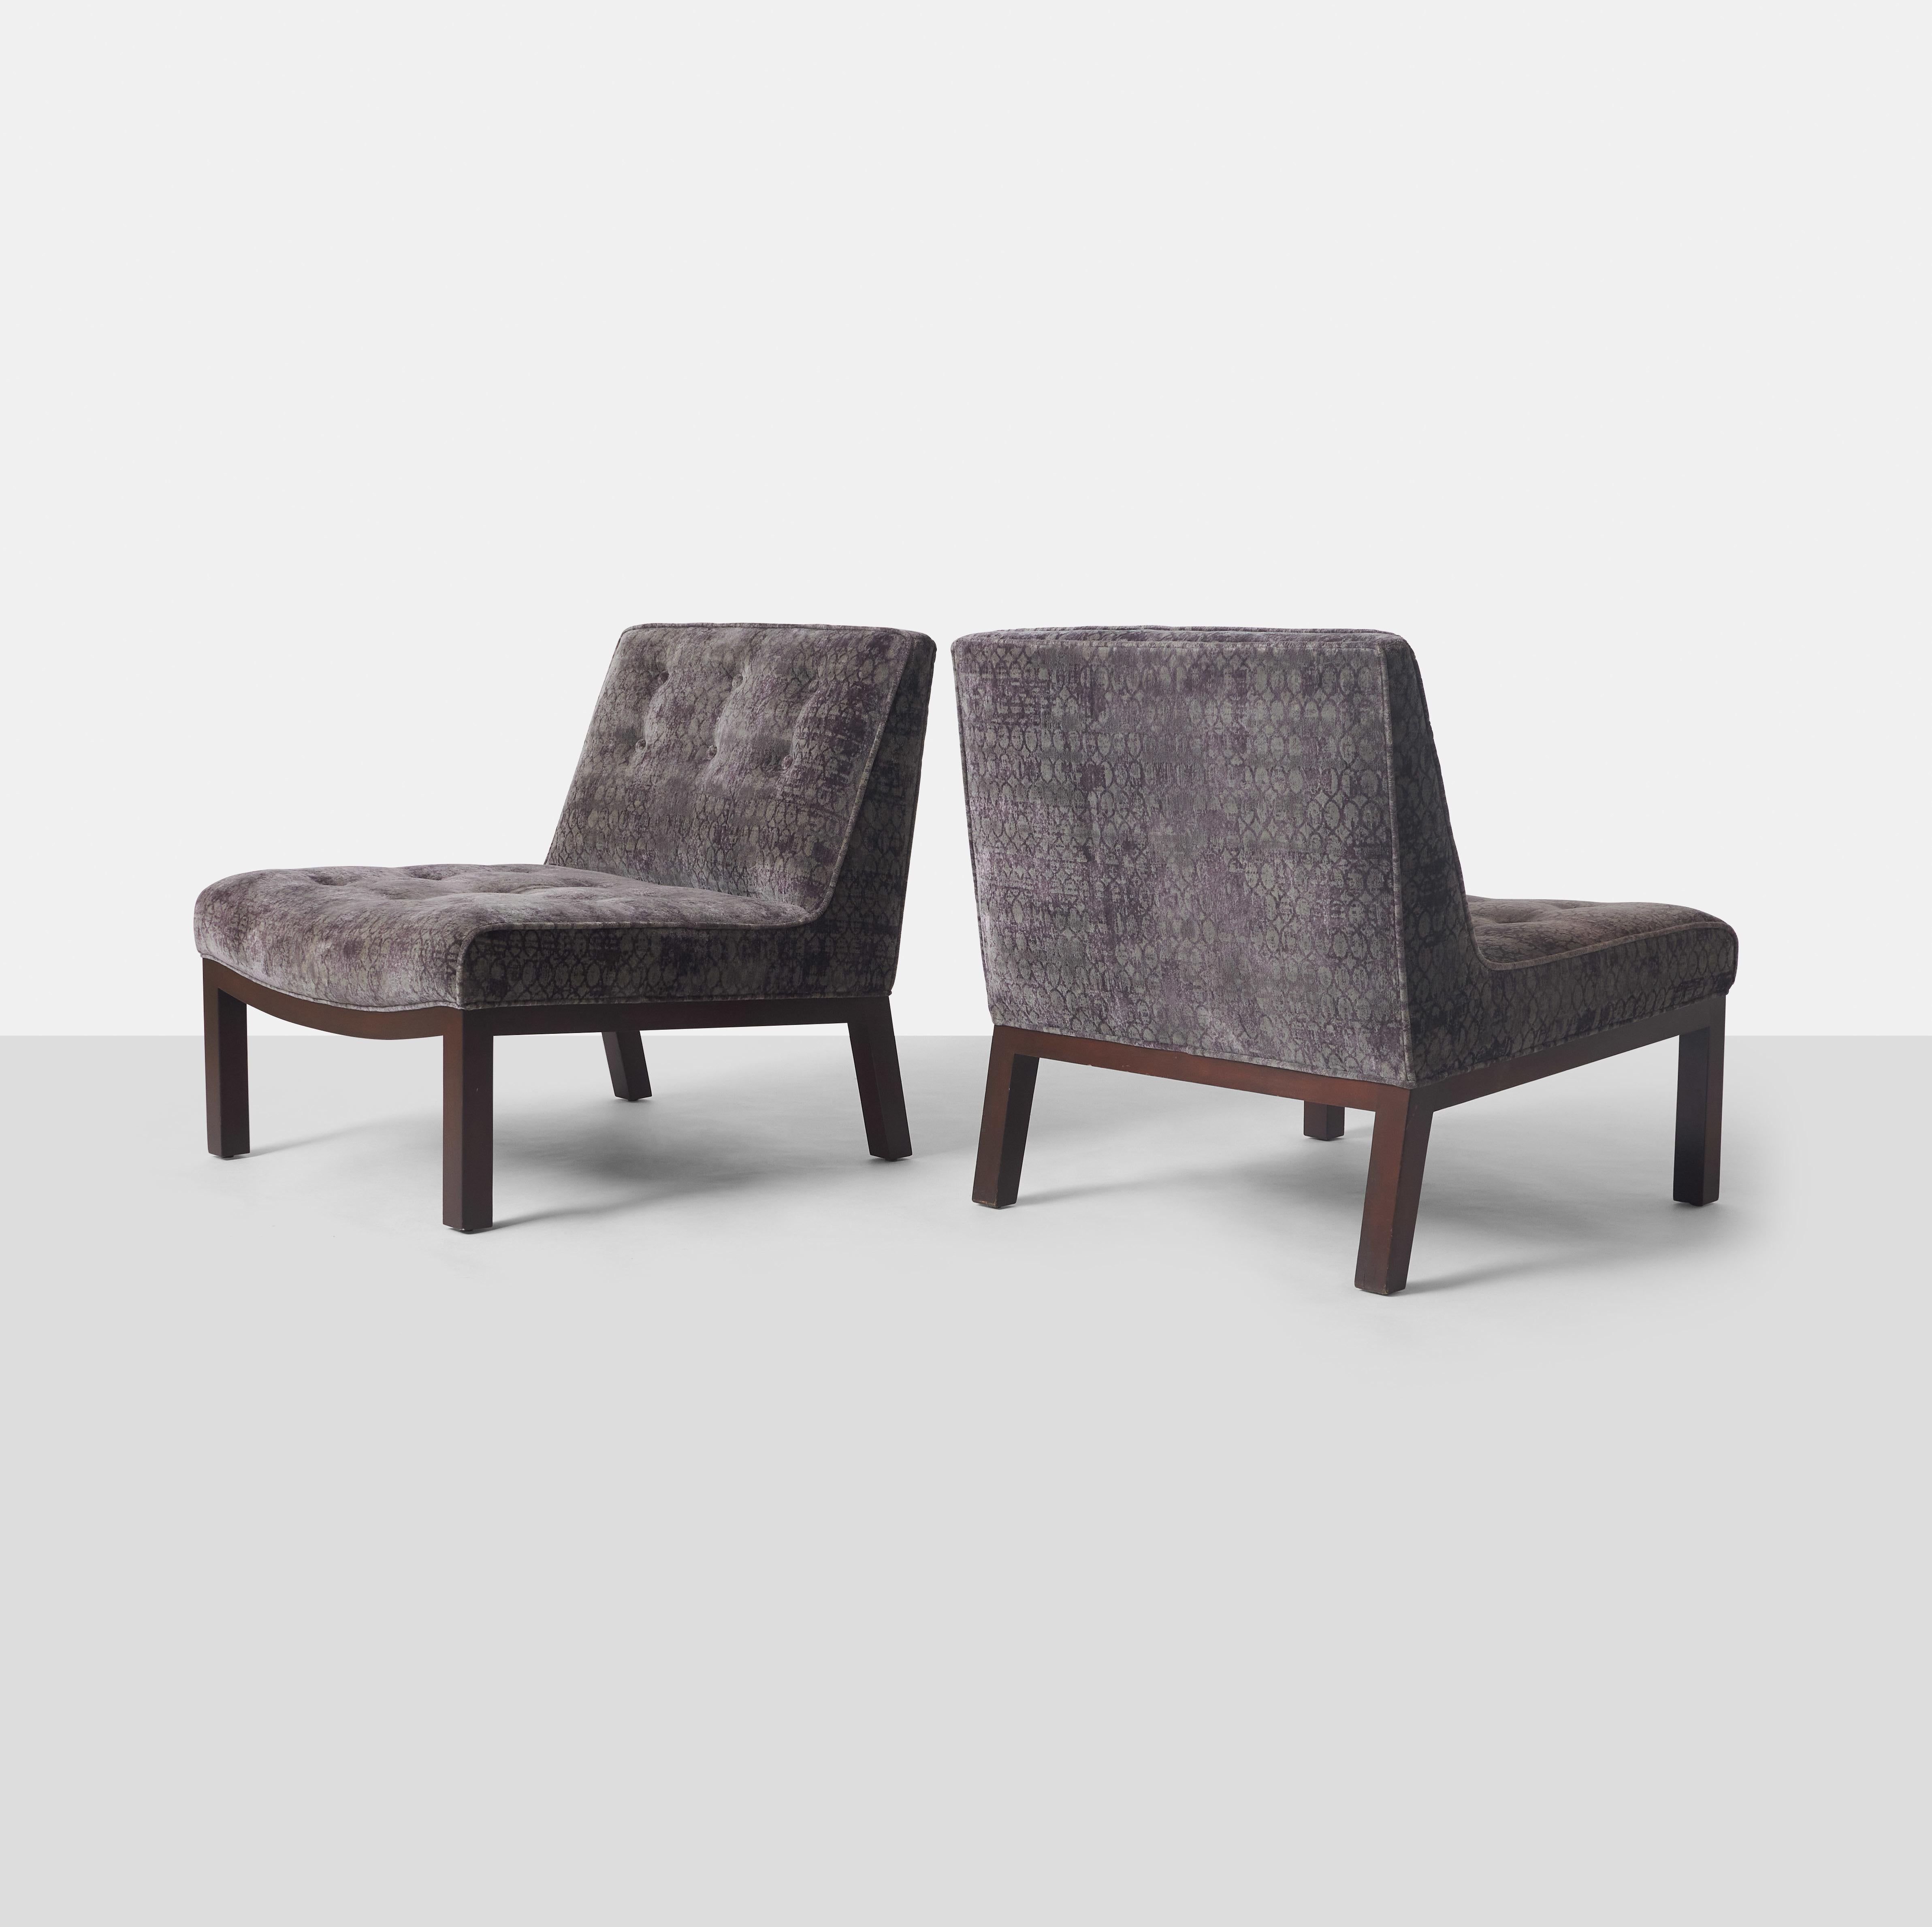 A pair of slipper chairs by Edward Wormley for Dunbar with mahogany feet and covered in the original Jack Lenor Larsen fabric.